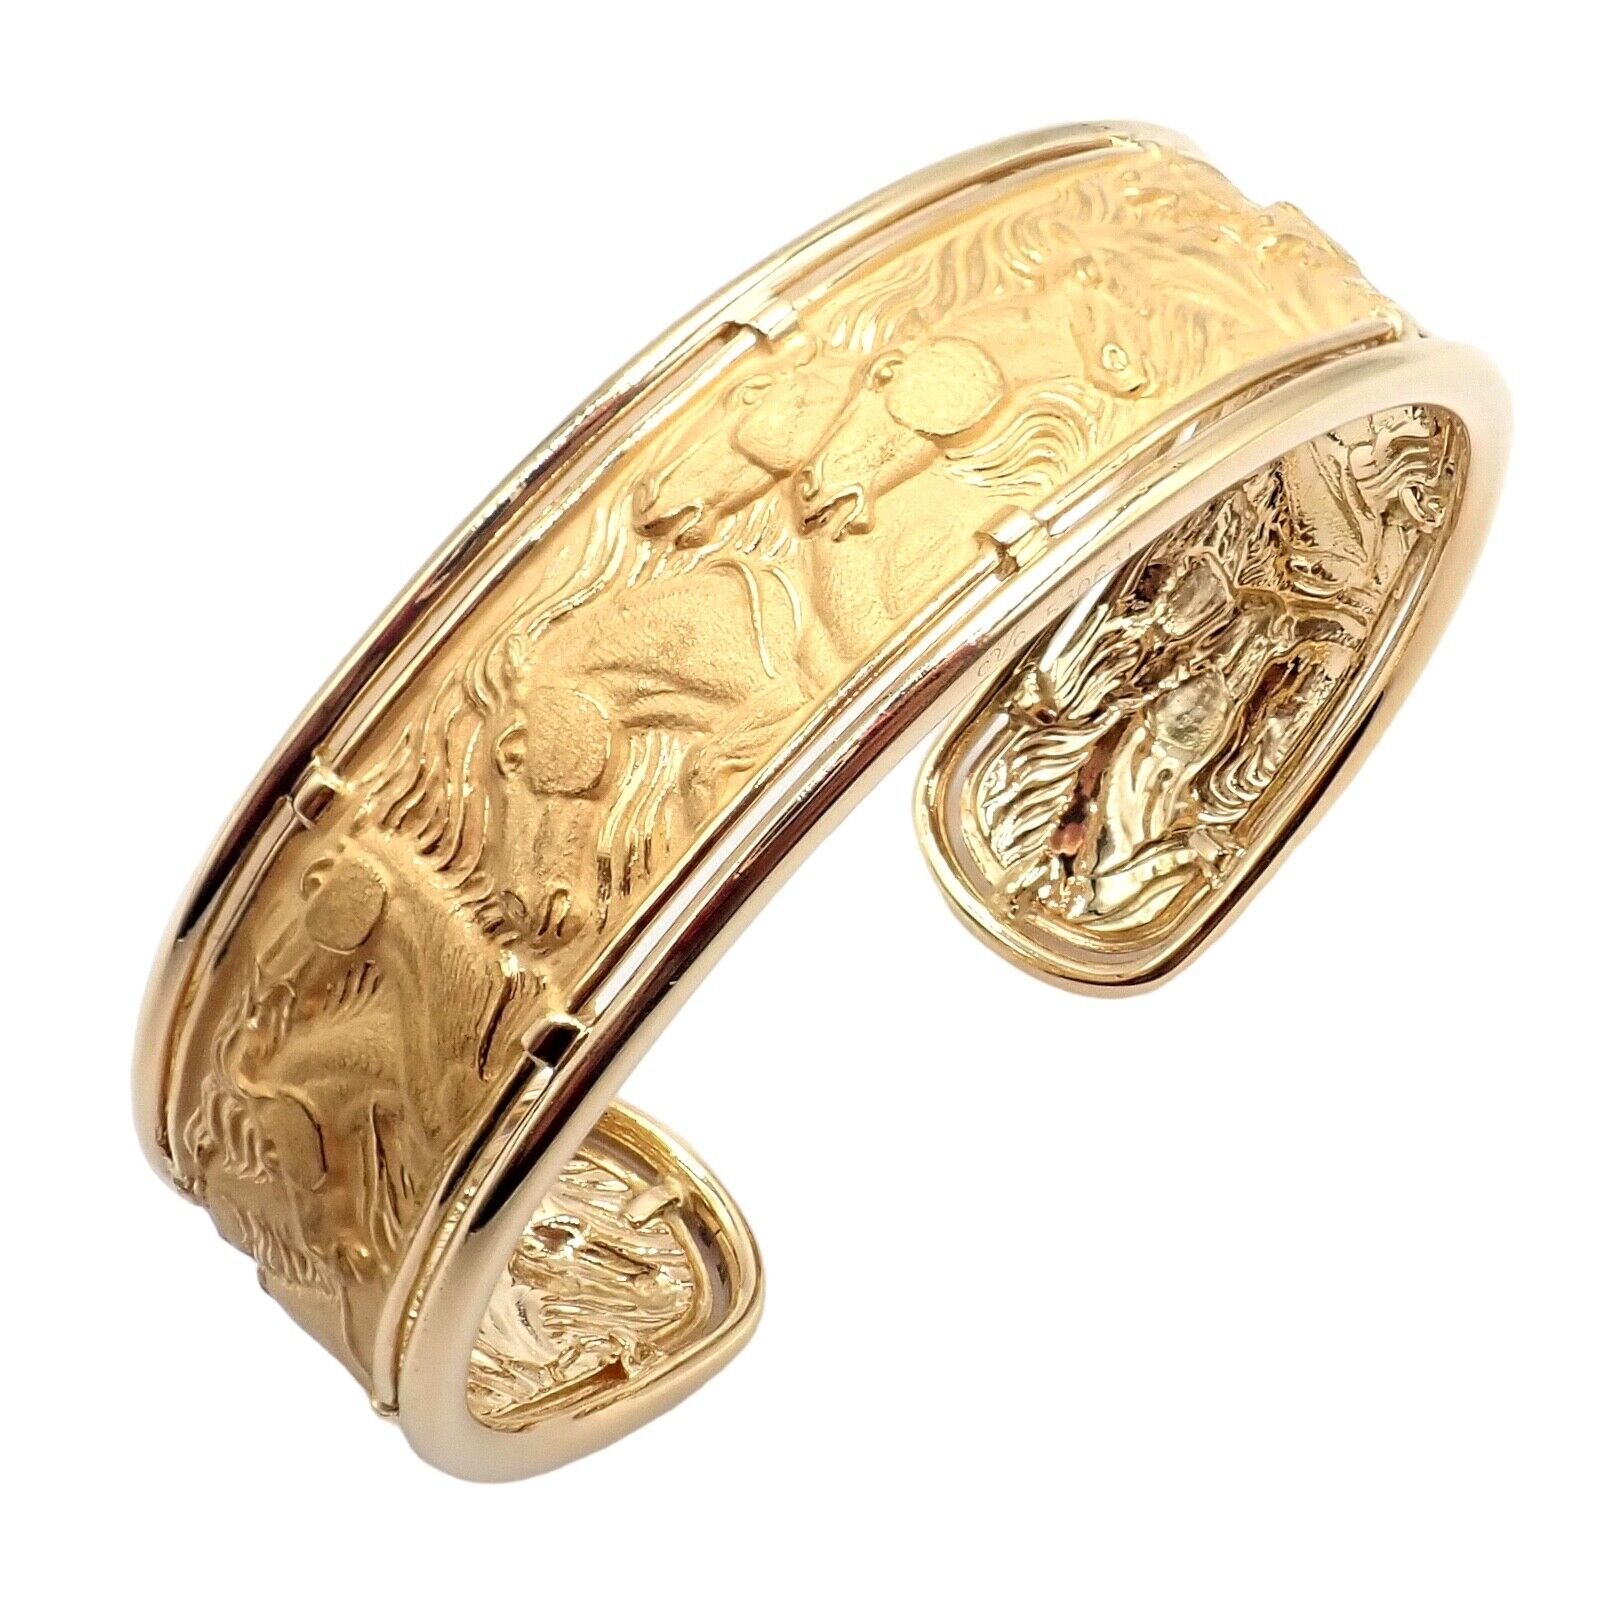 Carrera y Carrera Jewelry & Watches:Fine Jewelry:Bracelets & Charms Authentic! Carrera Y Carrera 18k Yellow Gold Equine Horse Stampede Cuff Bracelet